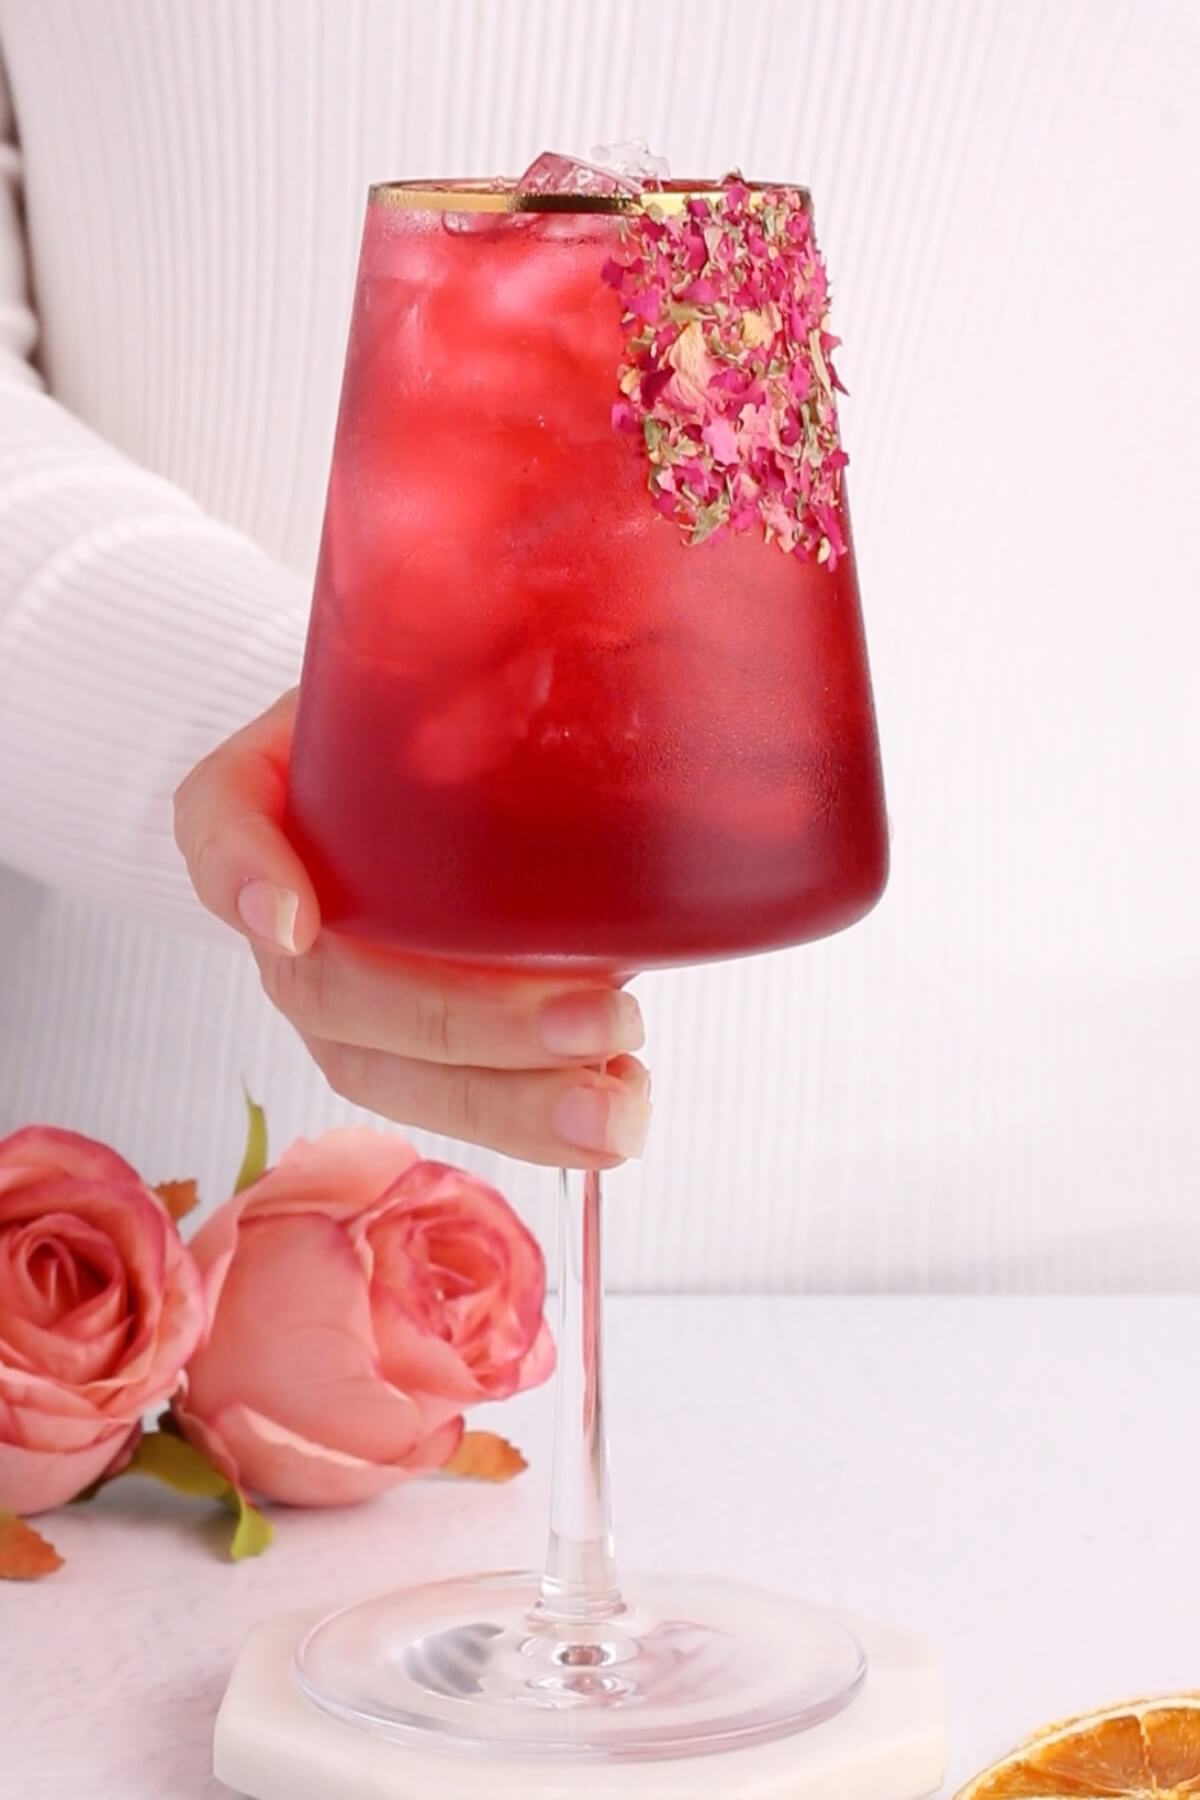 hibiscus mocktail recipe is a wine glass with a gold rim garnished with a rose petal rim.